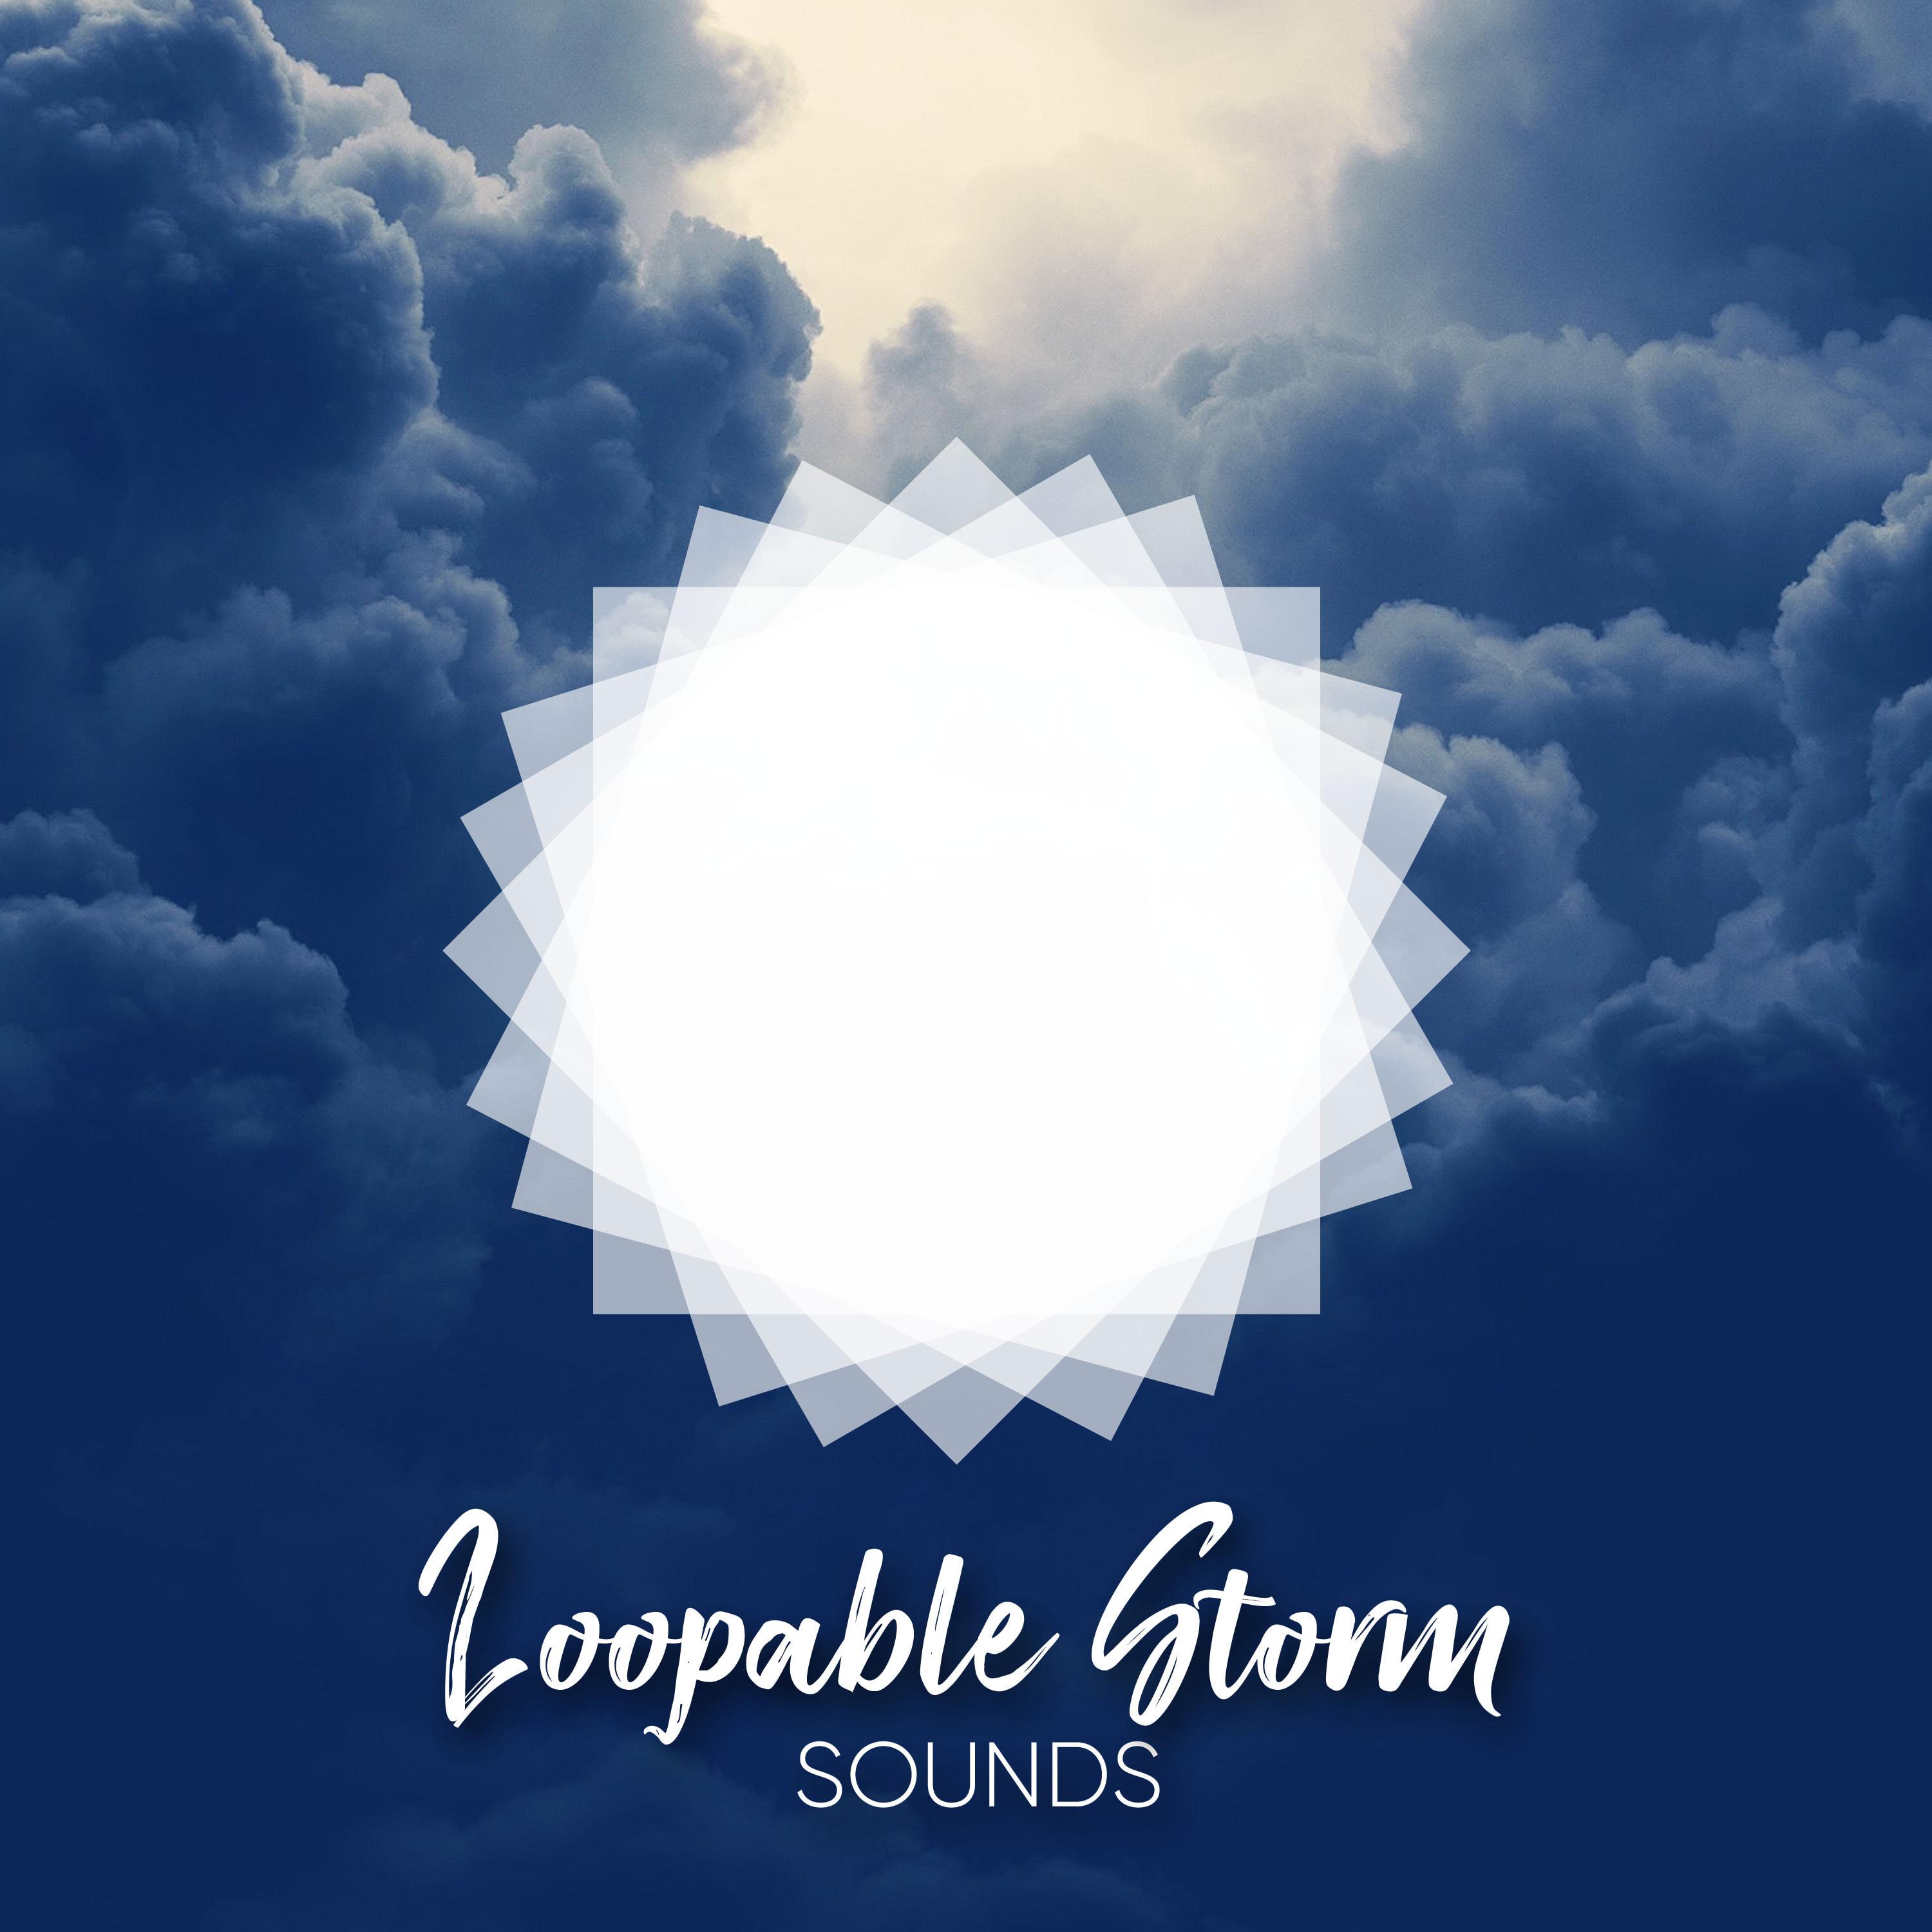 Loopable Storm Sounds for Sleep